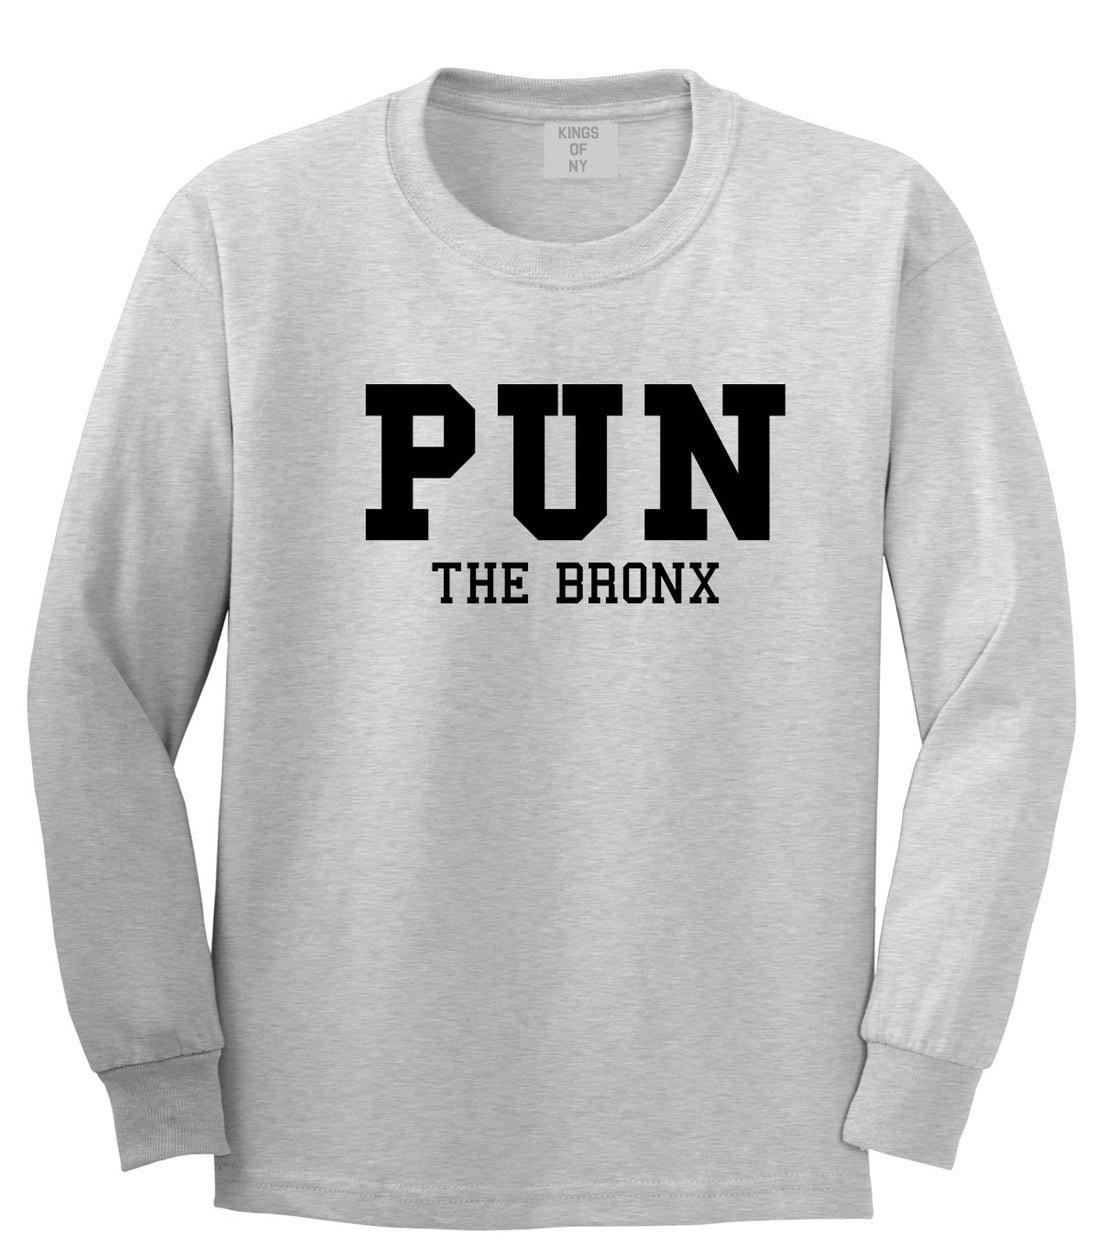 Pun The Bronx Long Sleeve T-Shirt in Grey by Kings Of NY